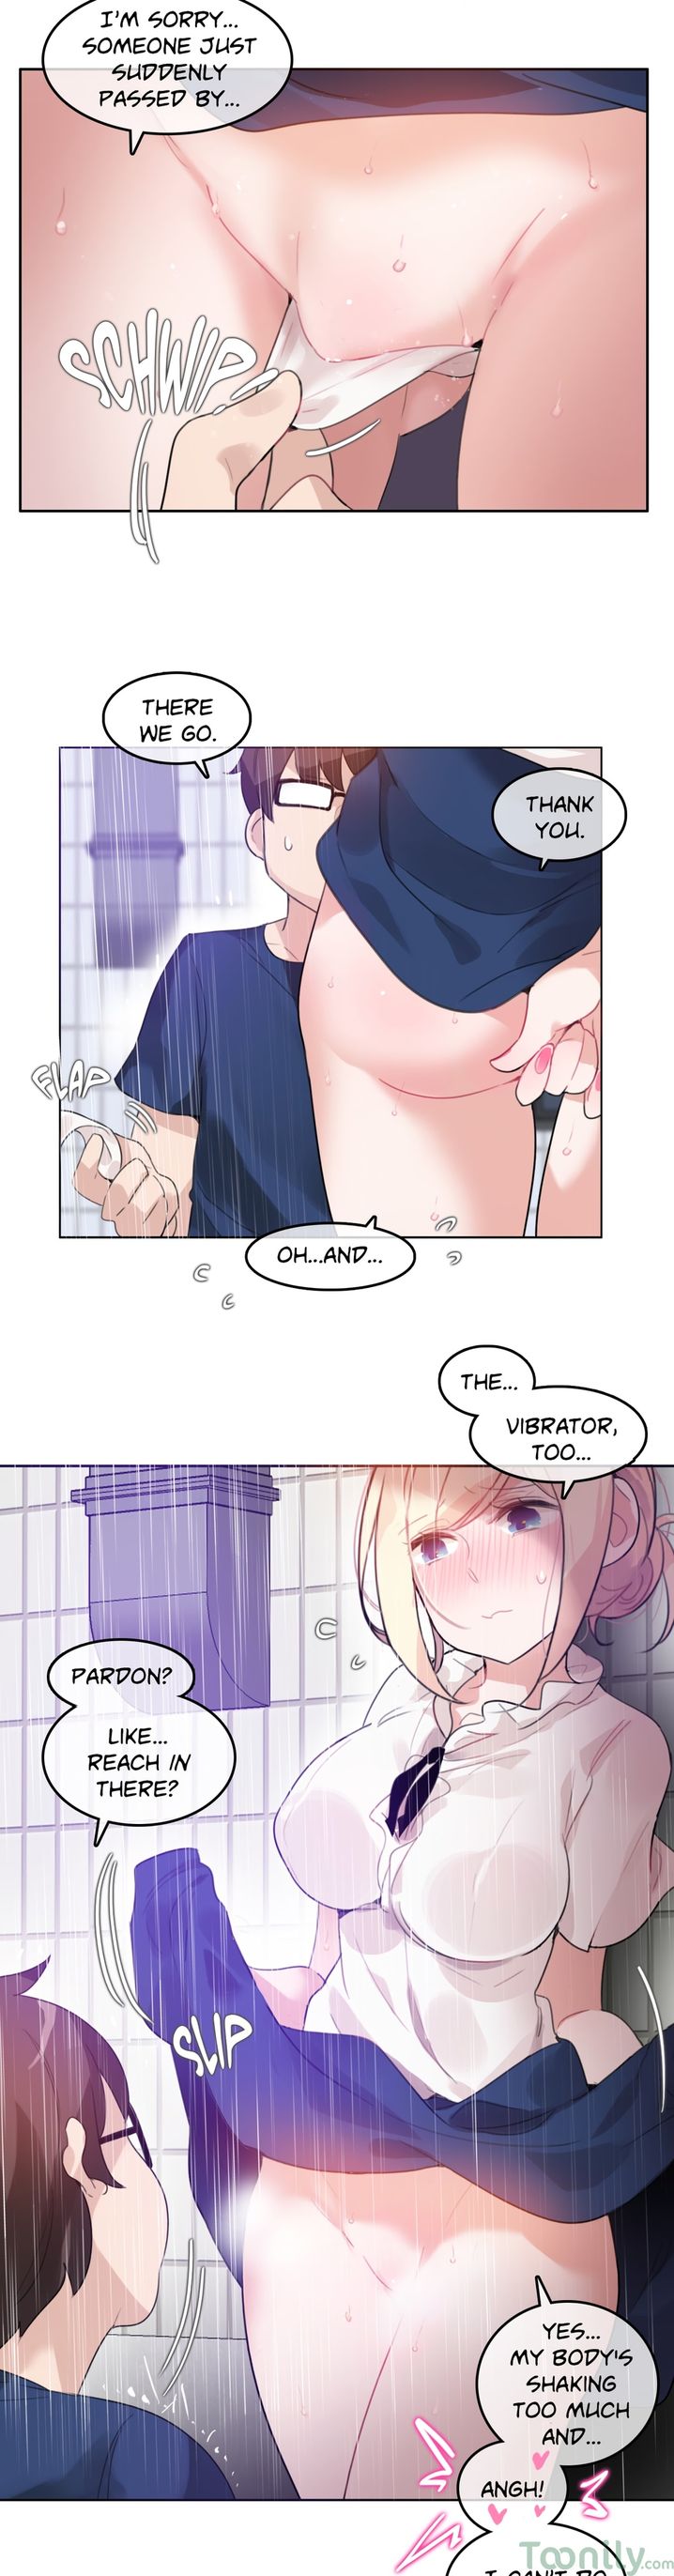 A Pervert’s Daily Life - Chapter 36 Page 10